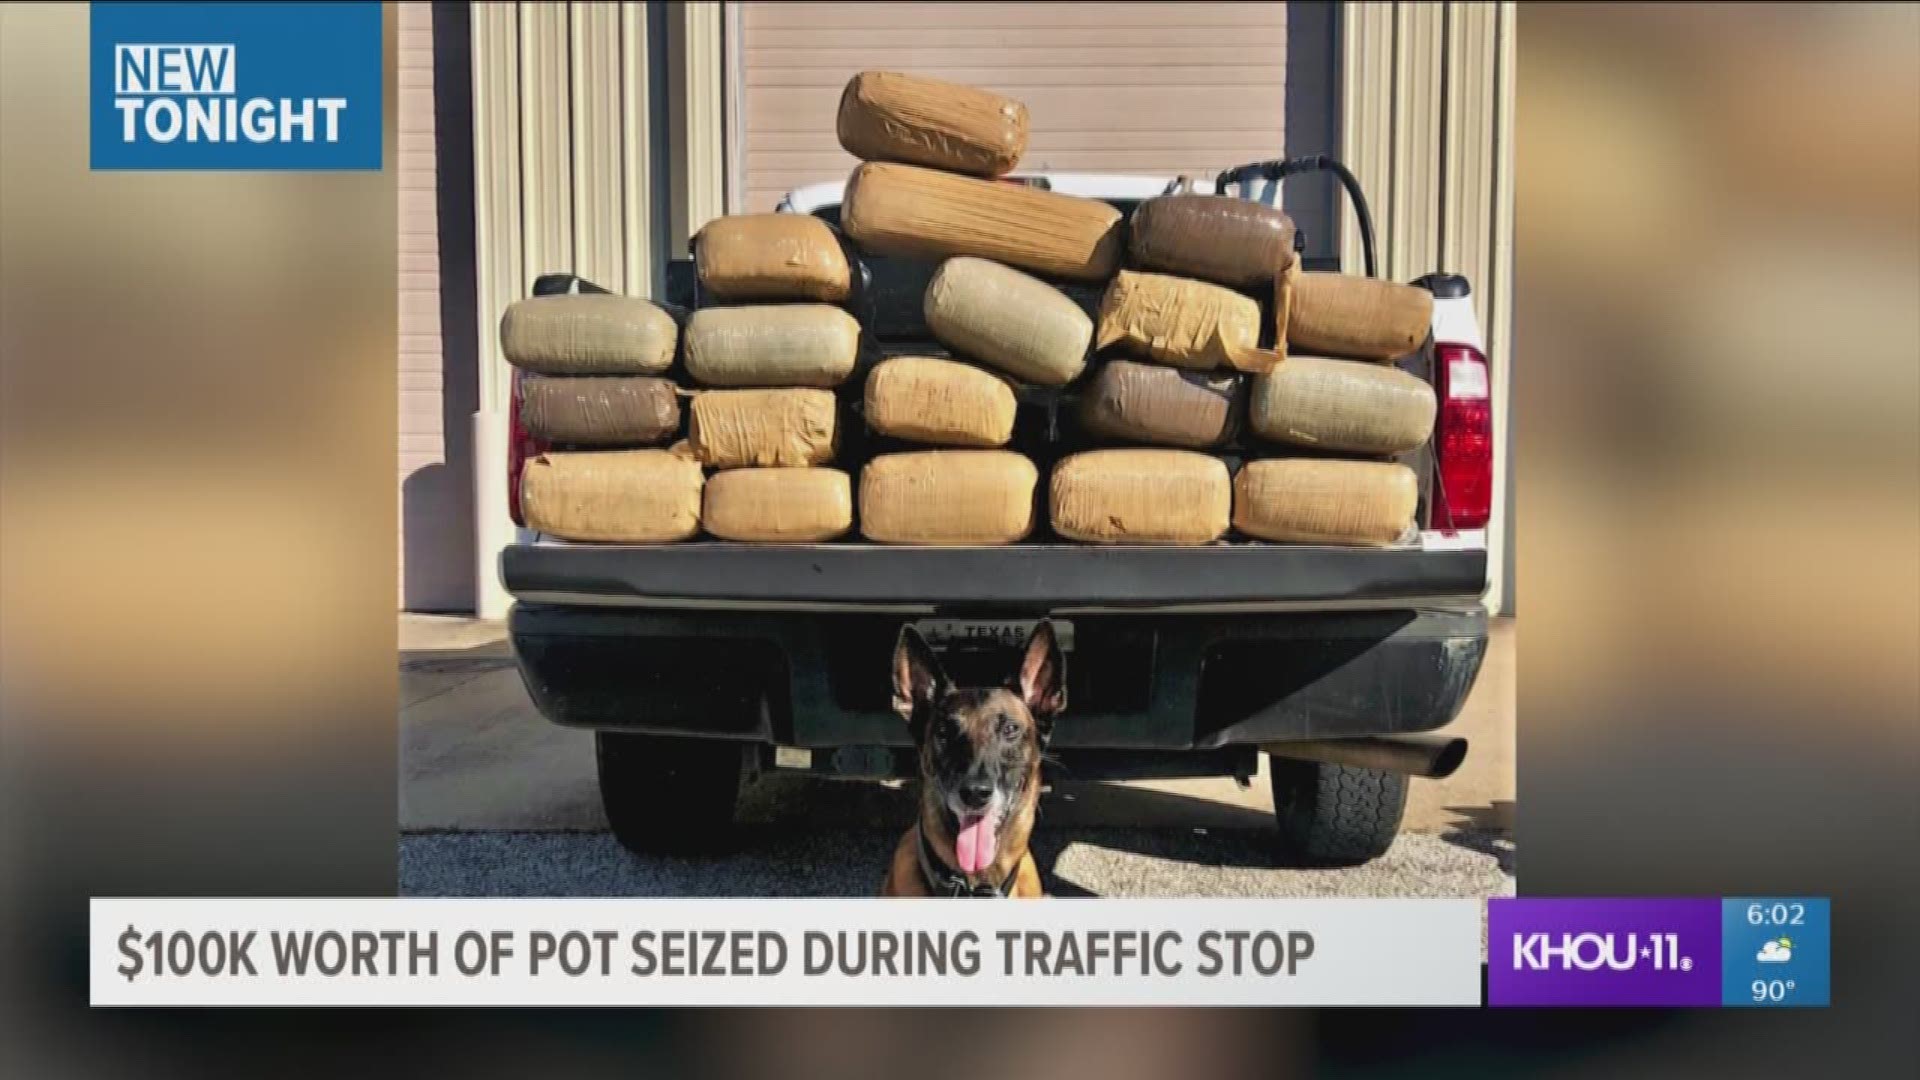 A man was arrested Wednesday after Fort Bend County Sheriff's deputies seized $100,000 worth of marijuana from his vehicle in Rosenberg.